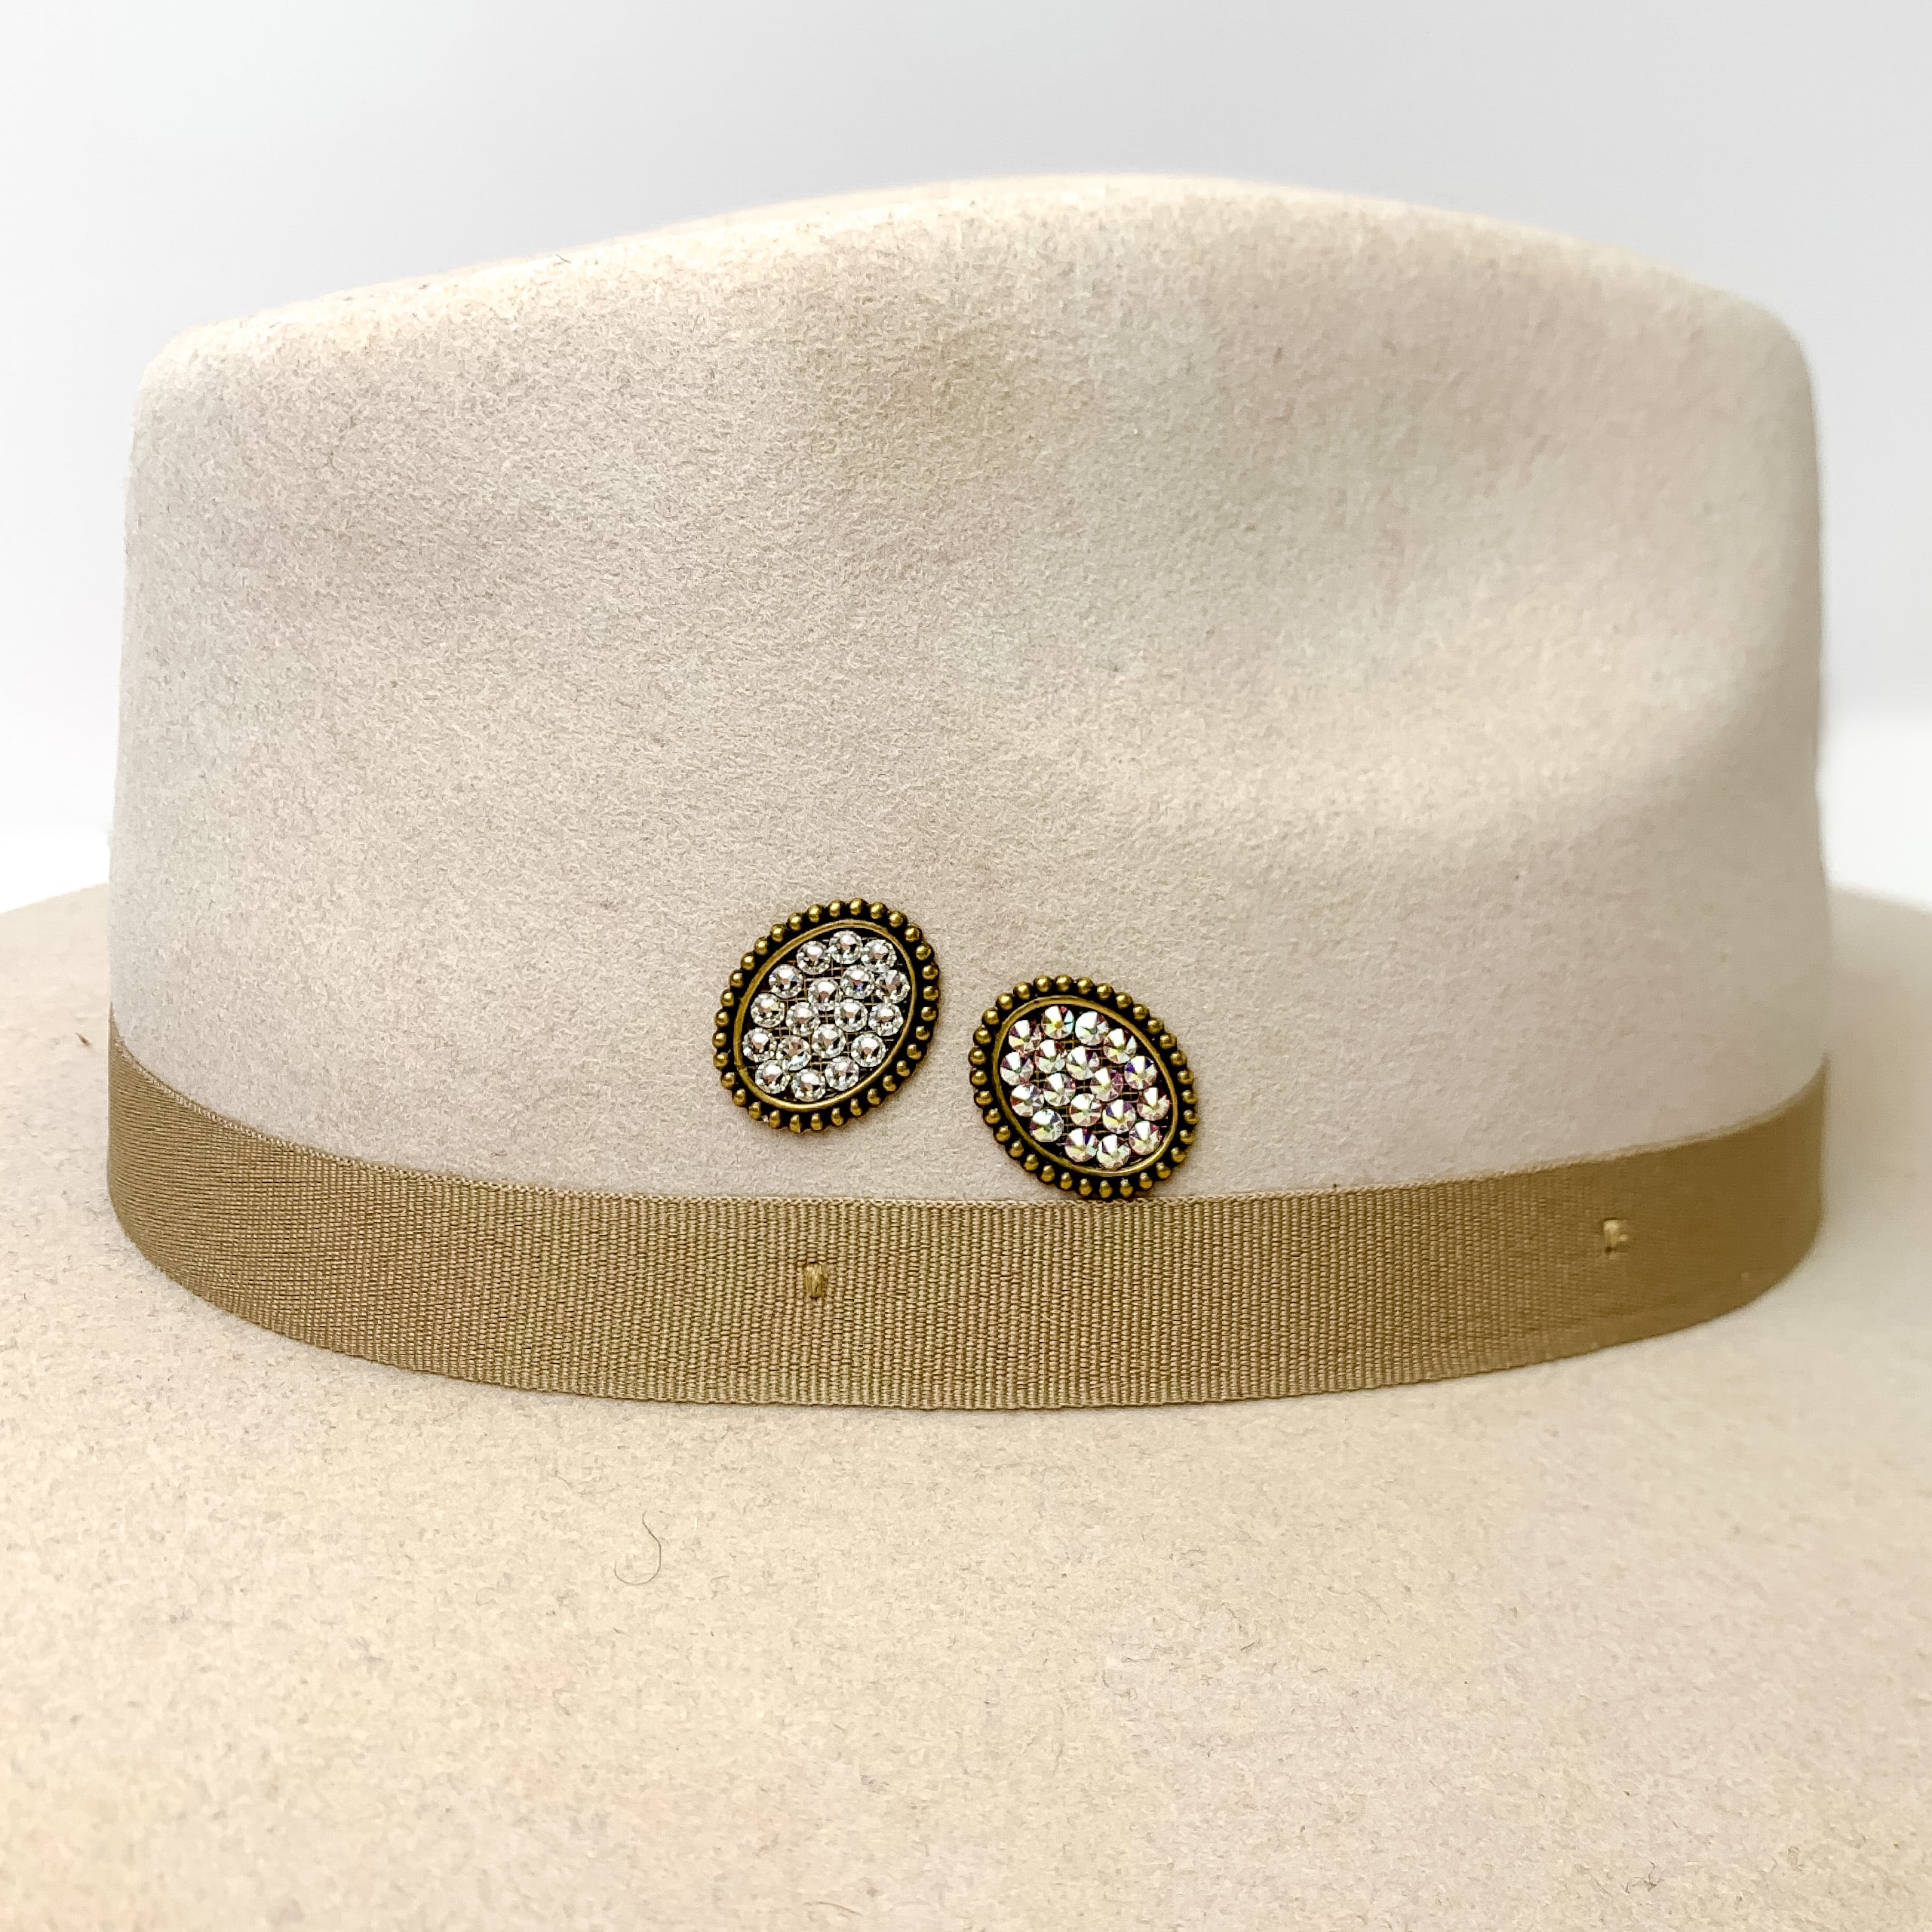 Pink Panache | Bronze Tone Oval Hat Pin with AB Crystals - Giddy Up Glamour Boutique